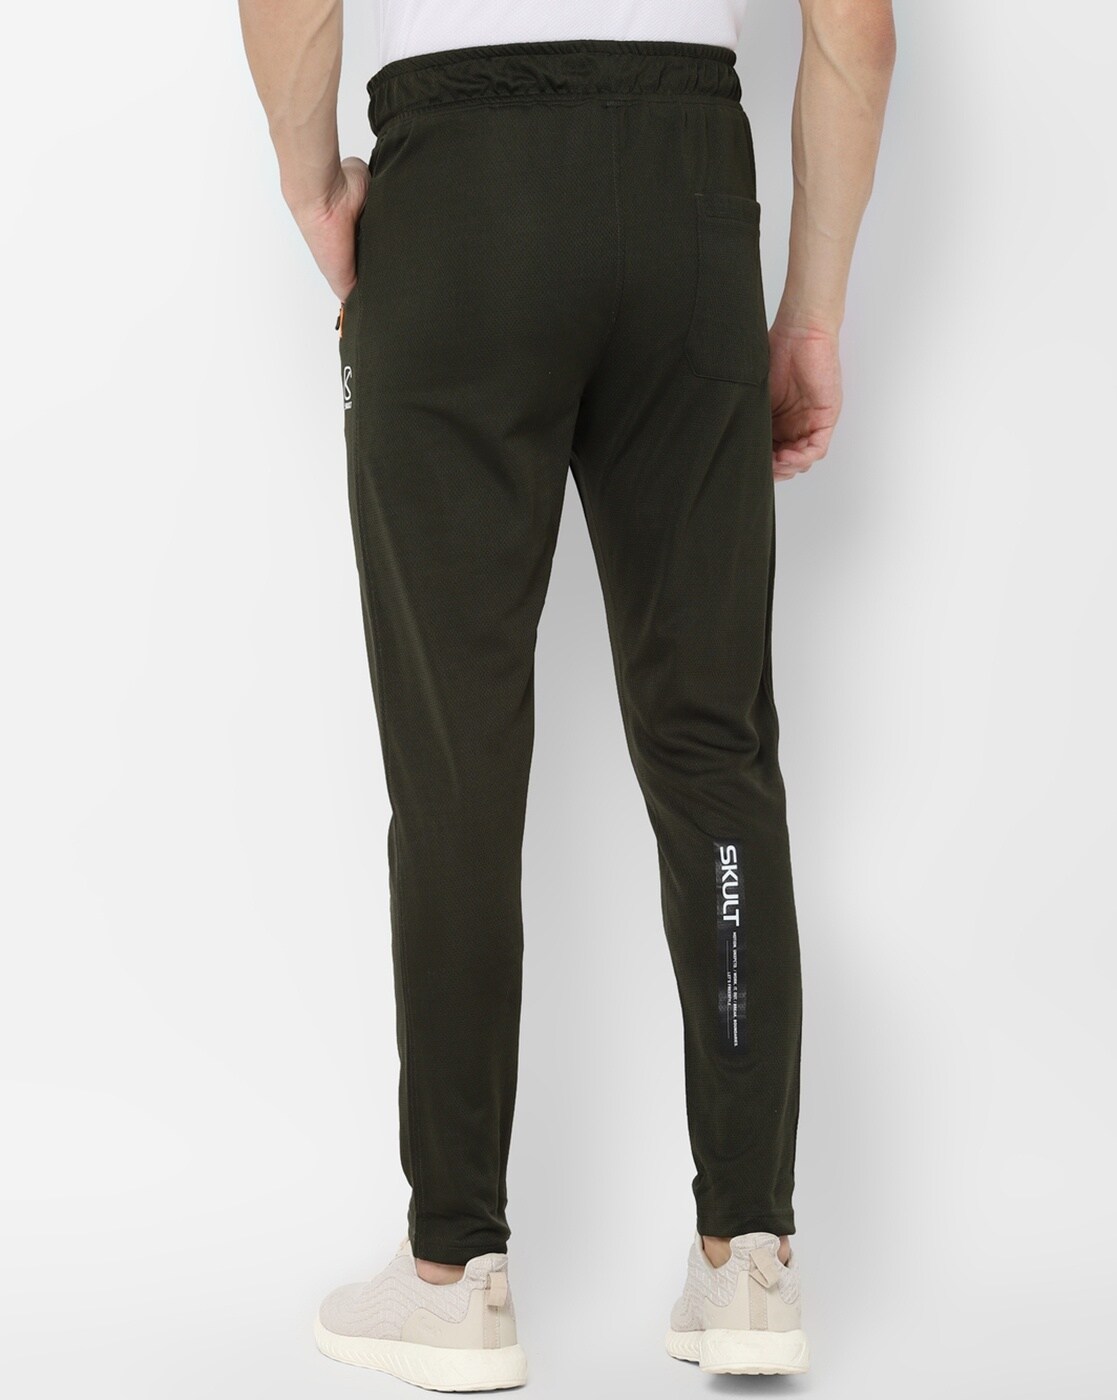 SKULT by Shahid Kapoor Men's Slim Fit Joggers (SKS19AMCWTK8TP0748_Dark  Olive_M) : Amazon.in: Clothing & Accessories